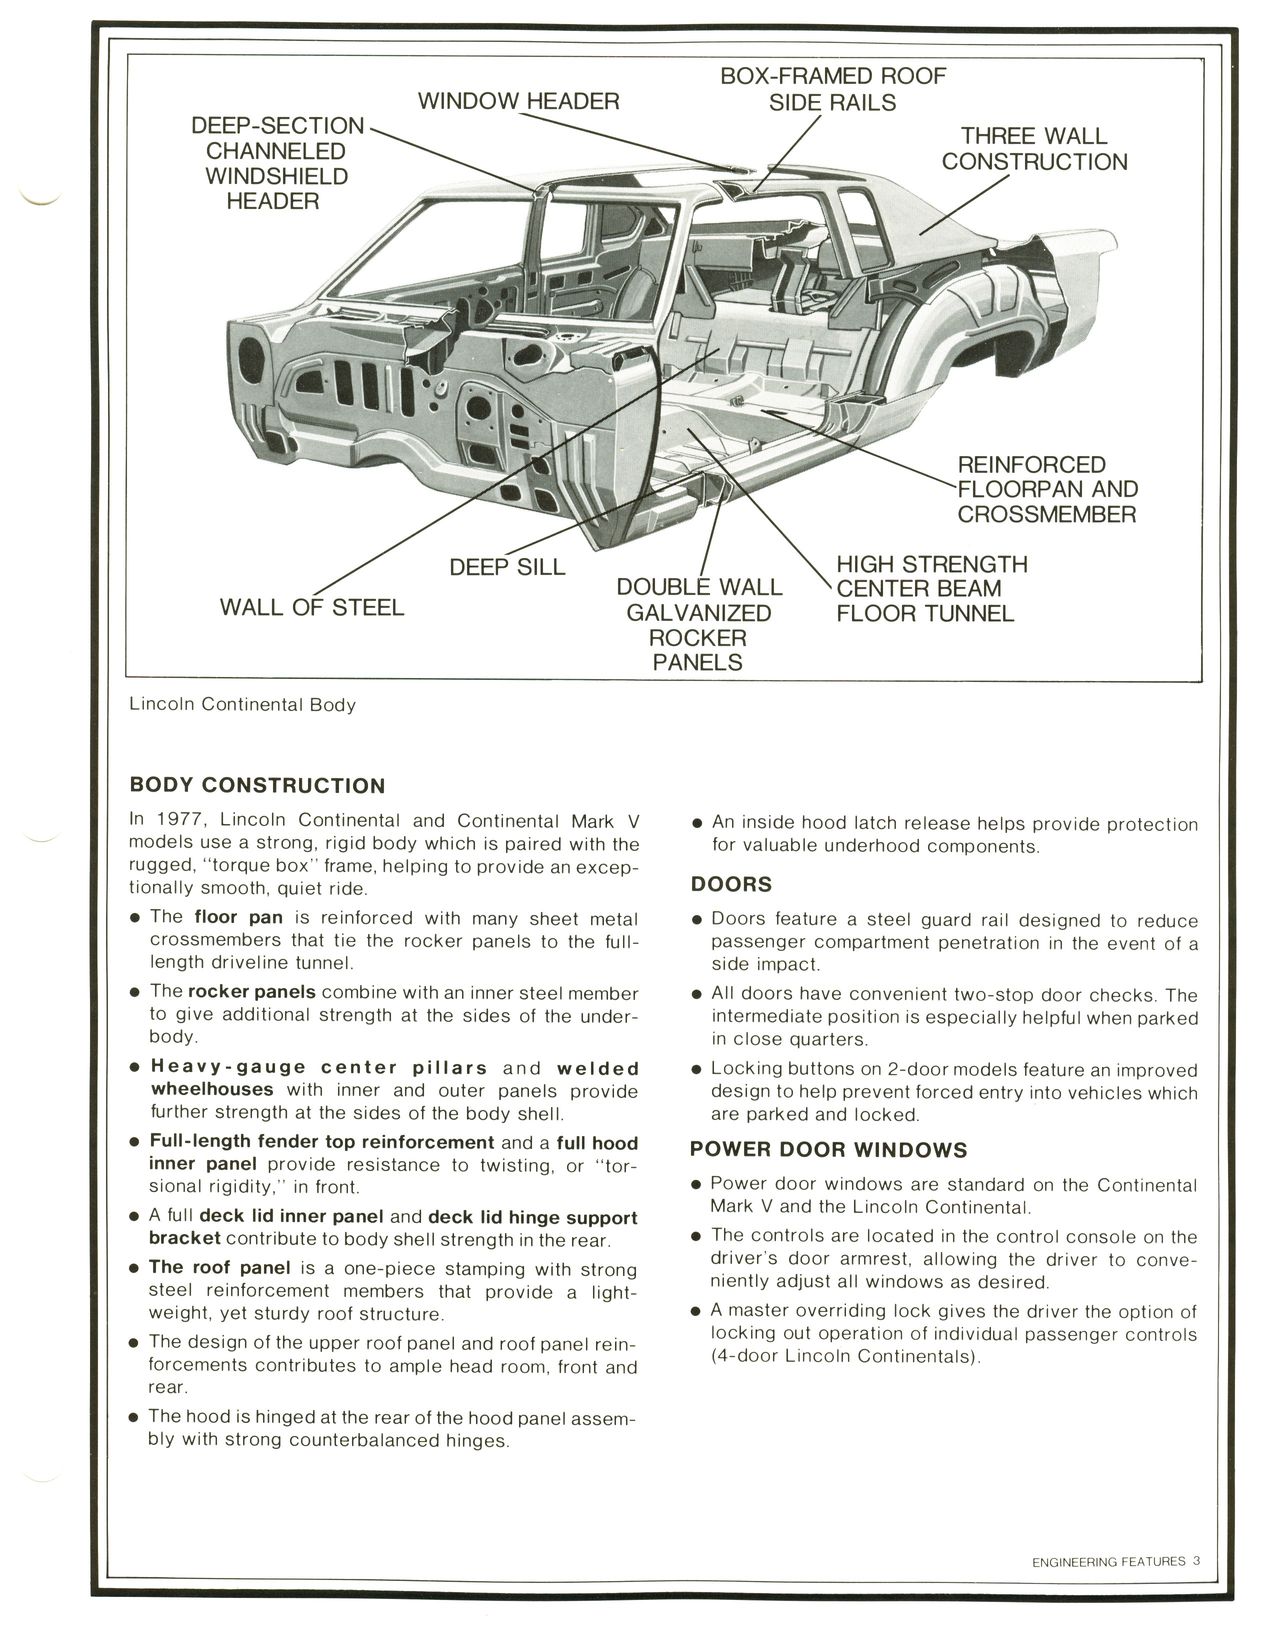 1977 Continental Product Facts Book-3-03